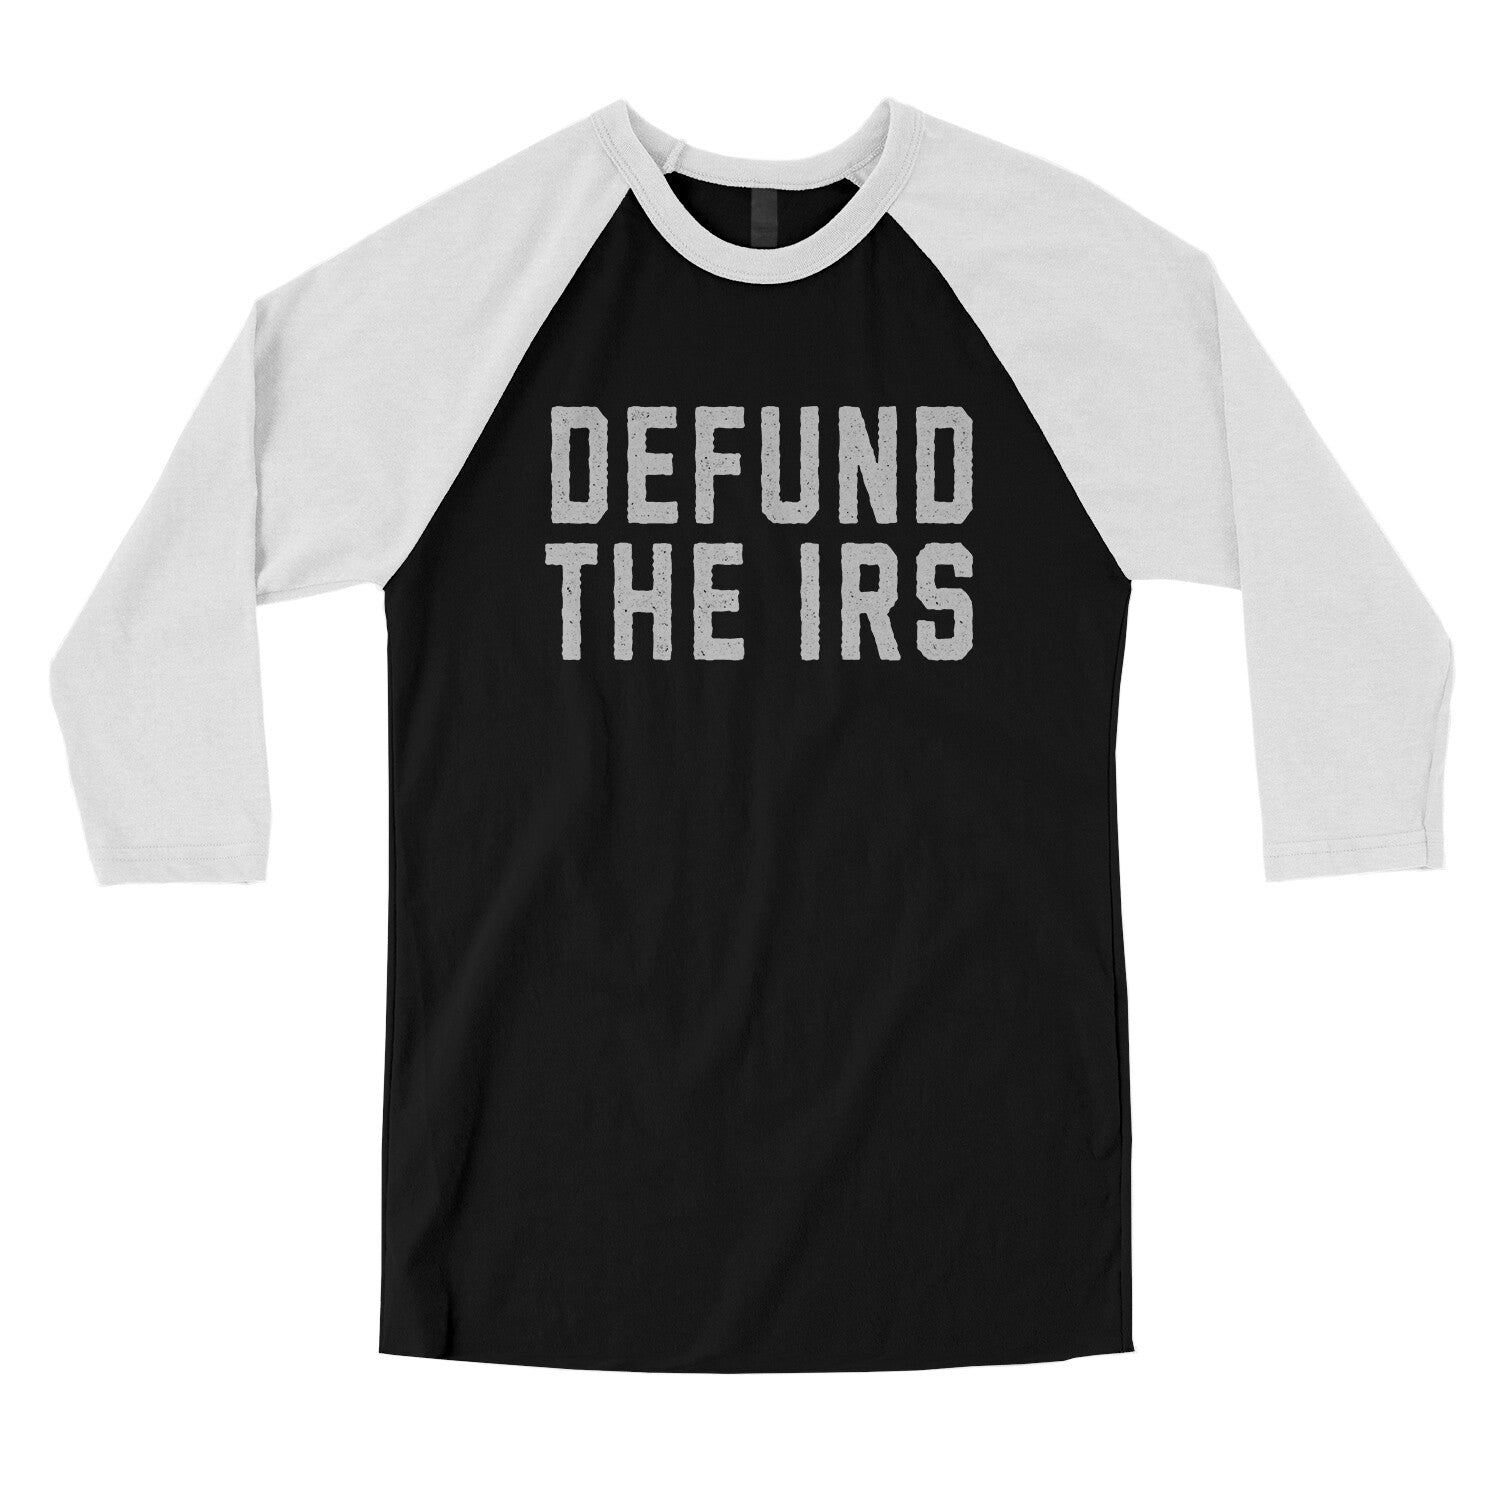 Defund the IRS in Black with White Color